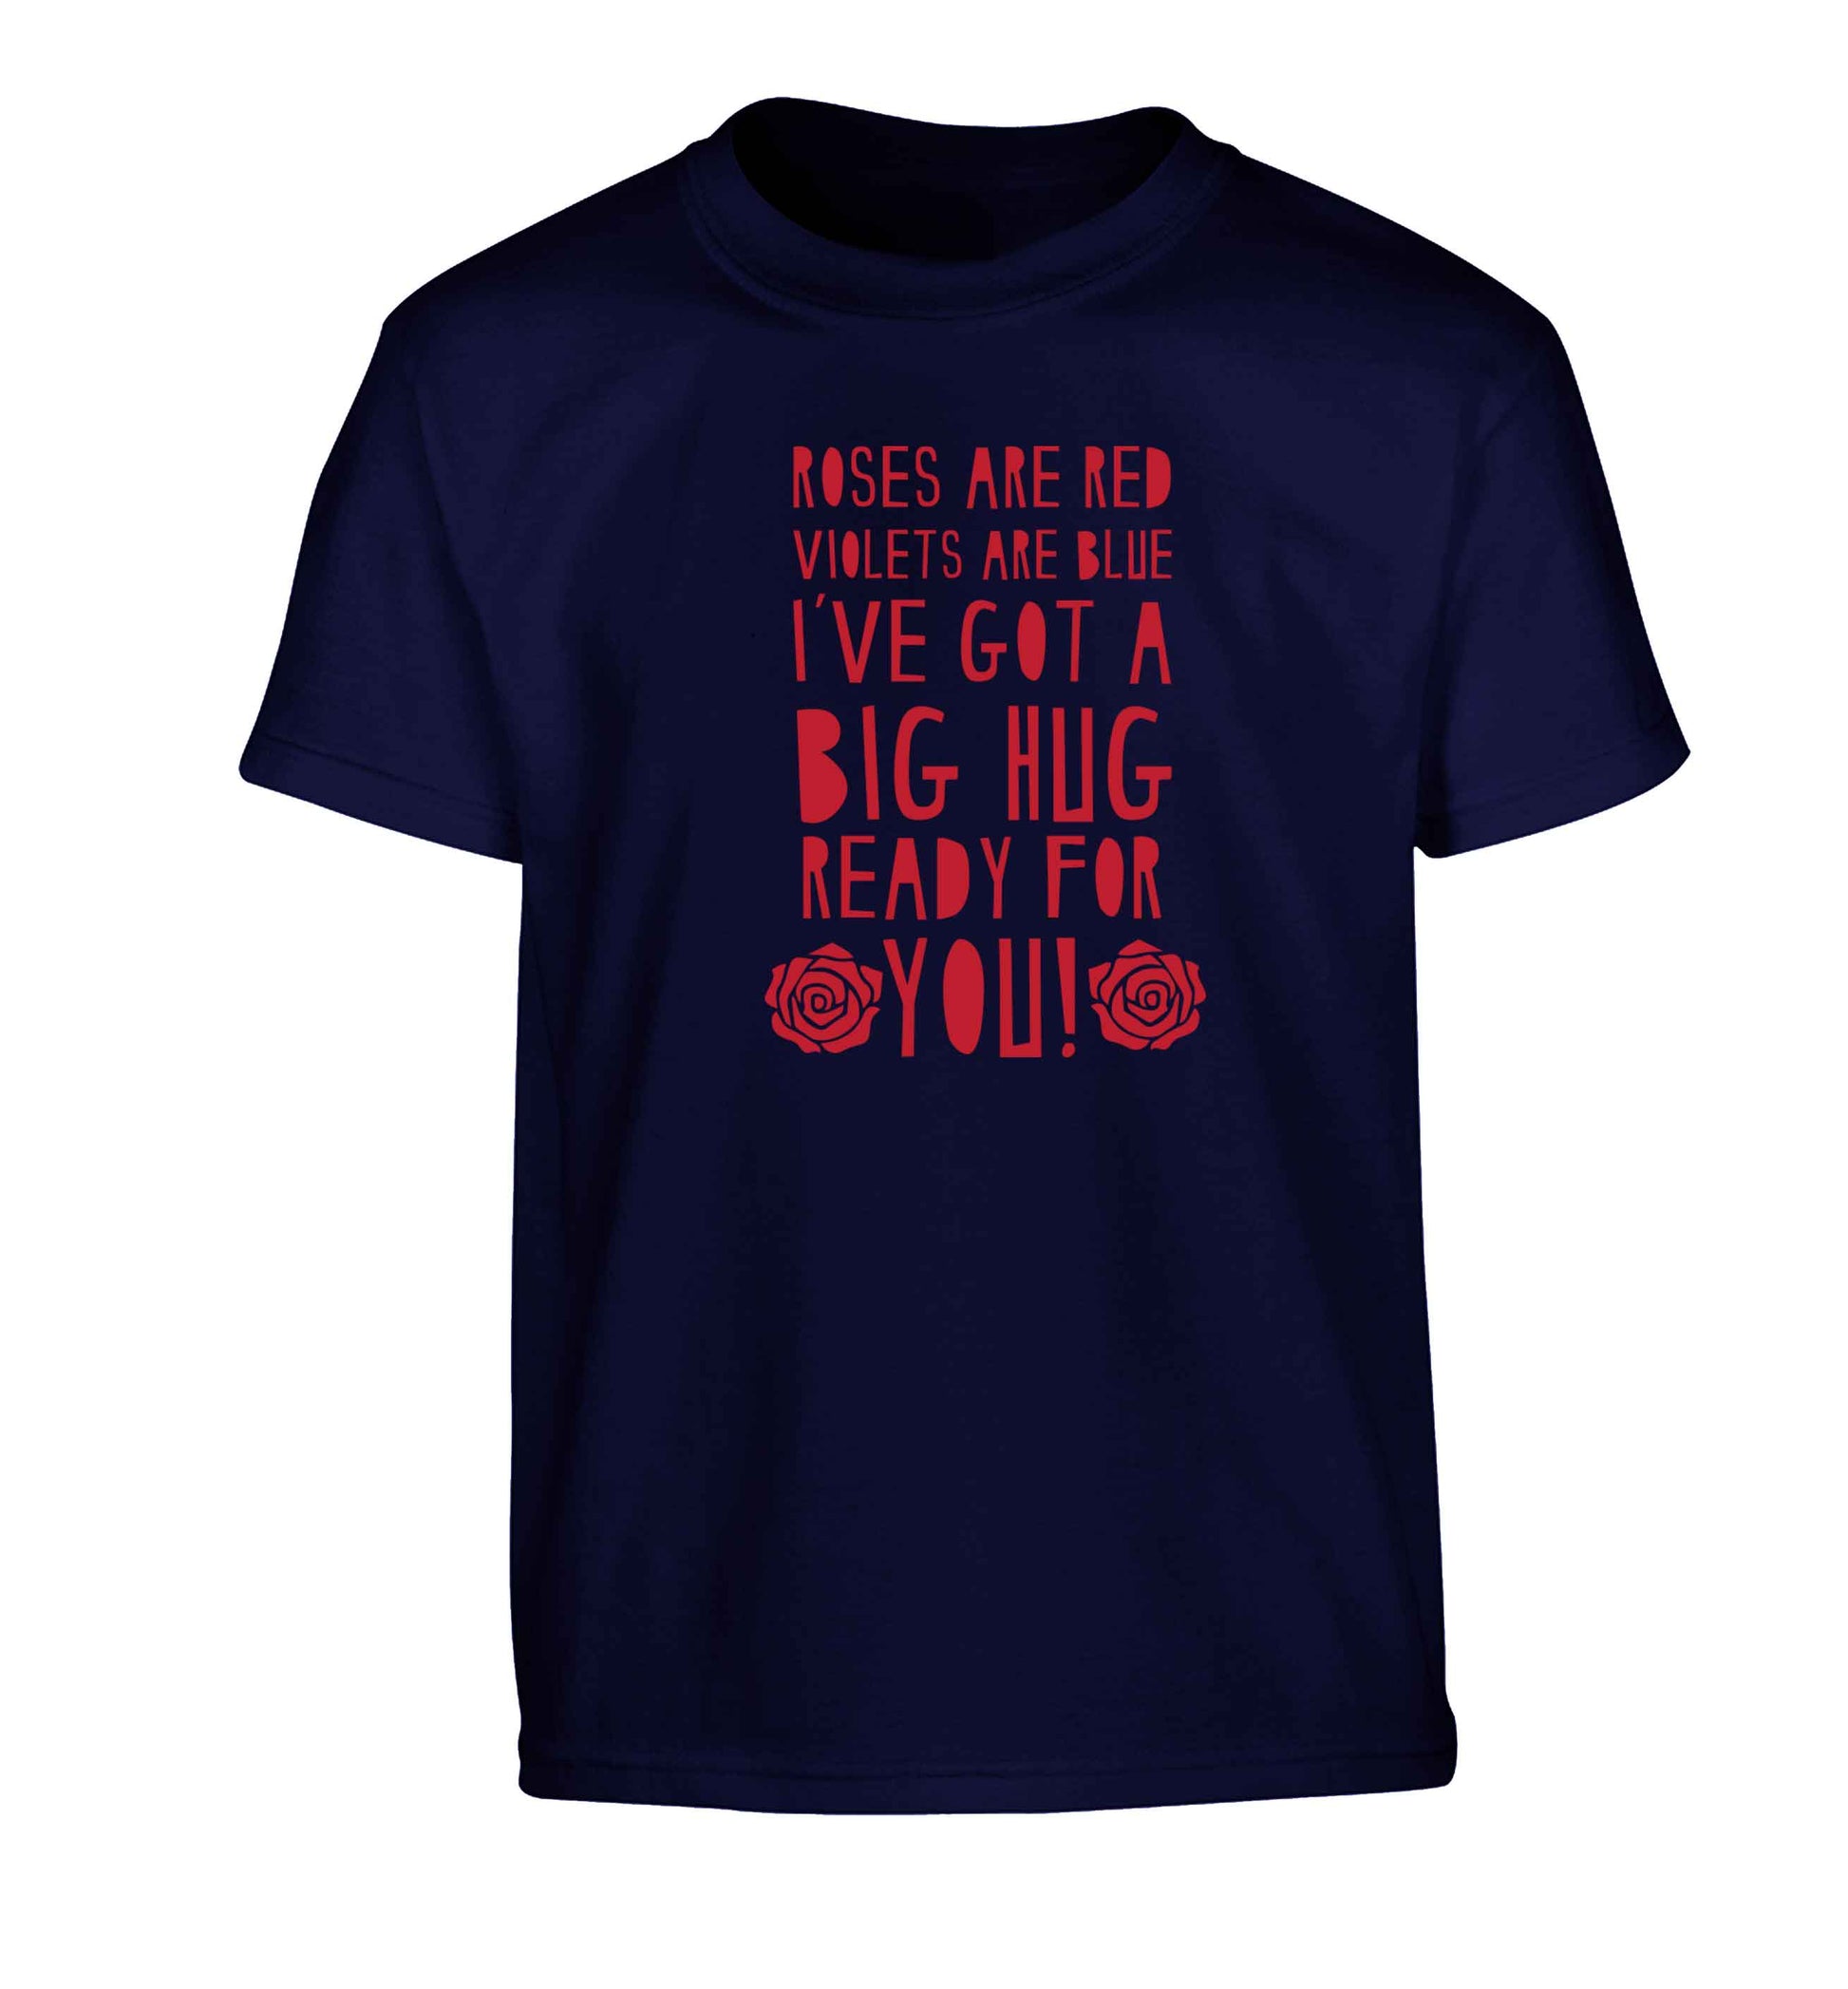 Roses are red violets are blue I've got a big hug coming for you Children's navy Tshirt 12-13 Years